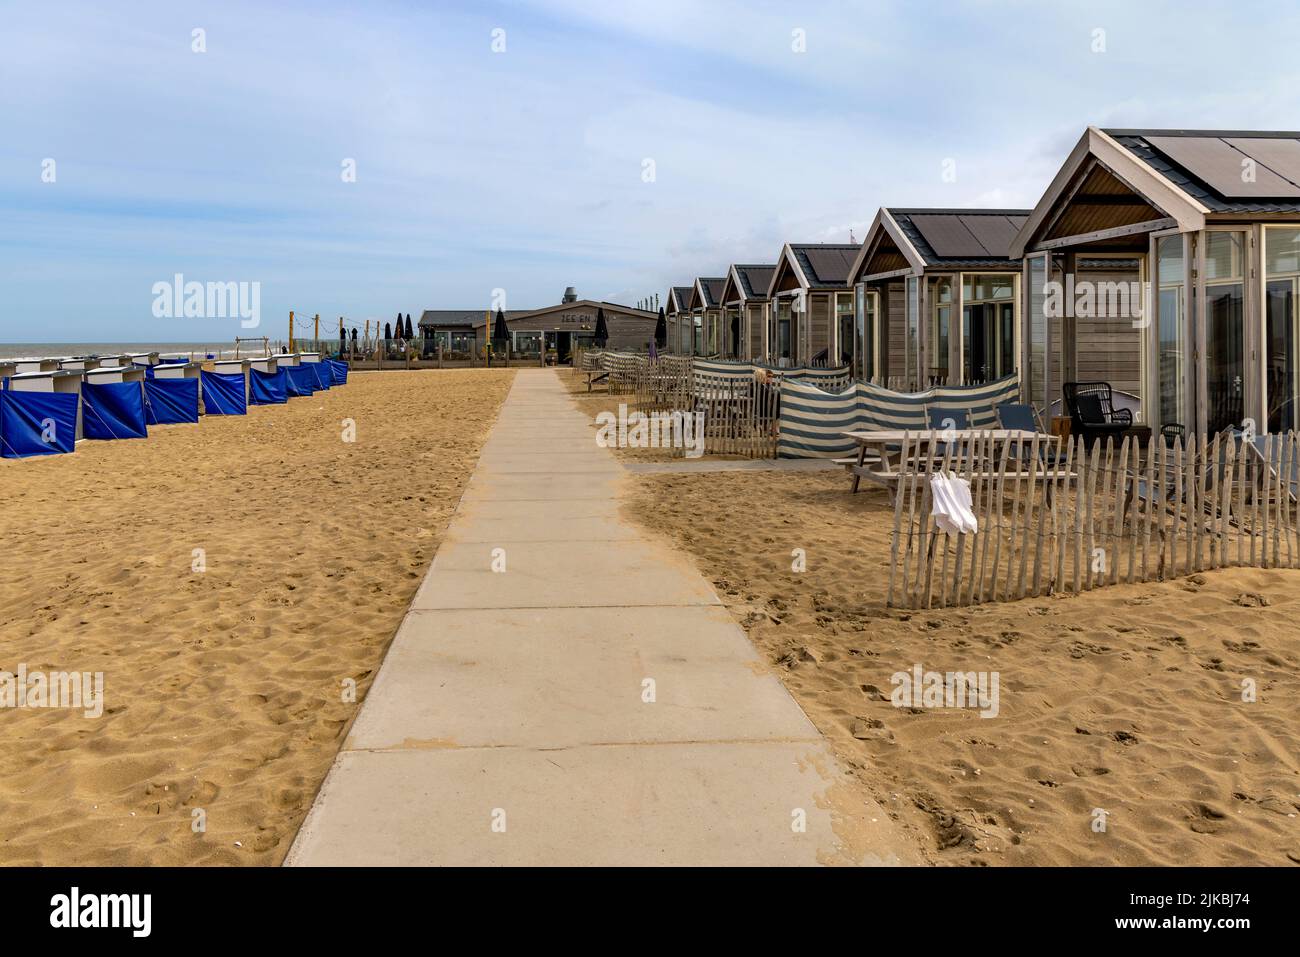 Tourist attractions along the North Sea coast: Chalets and cabins for hire, Katwijk, South Holland, The Netherlands. Stock Photo